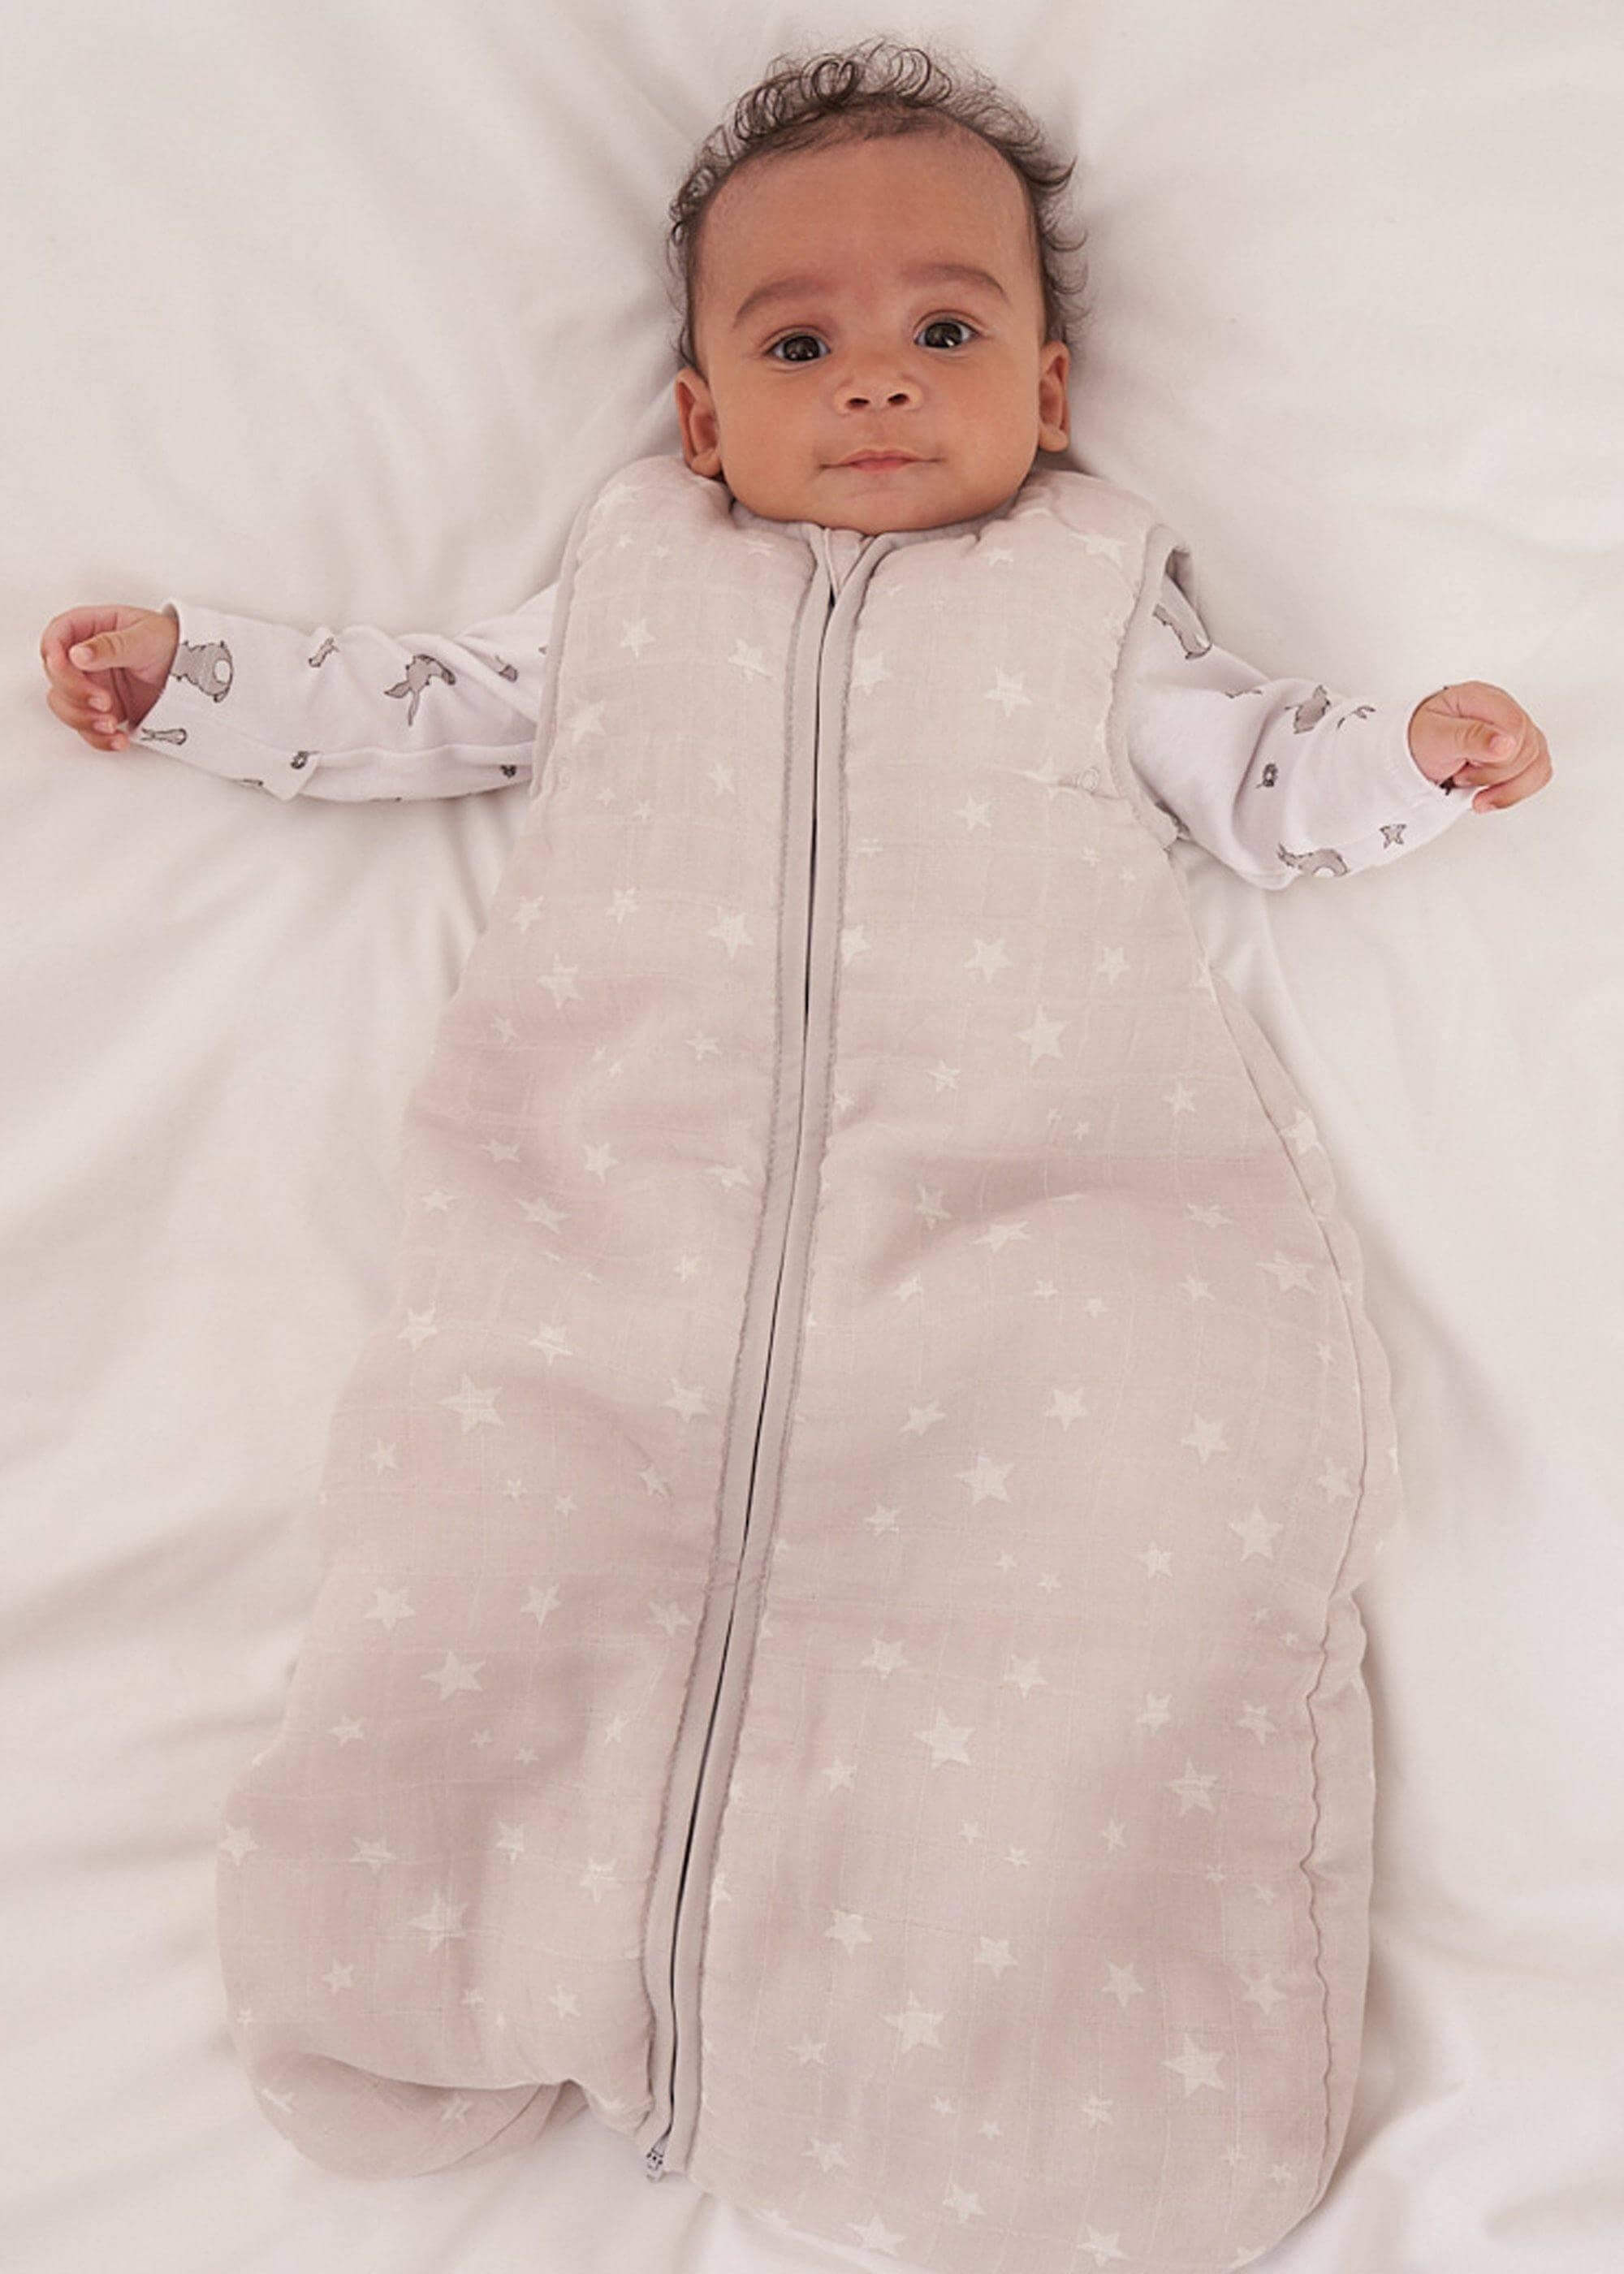 Choosing the right Baby Sleeping Bag - The Baby Academy